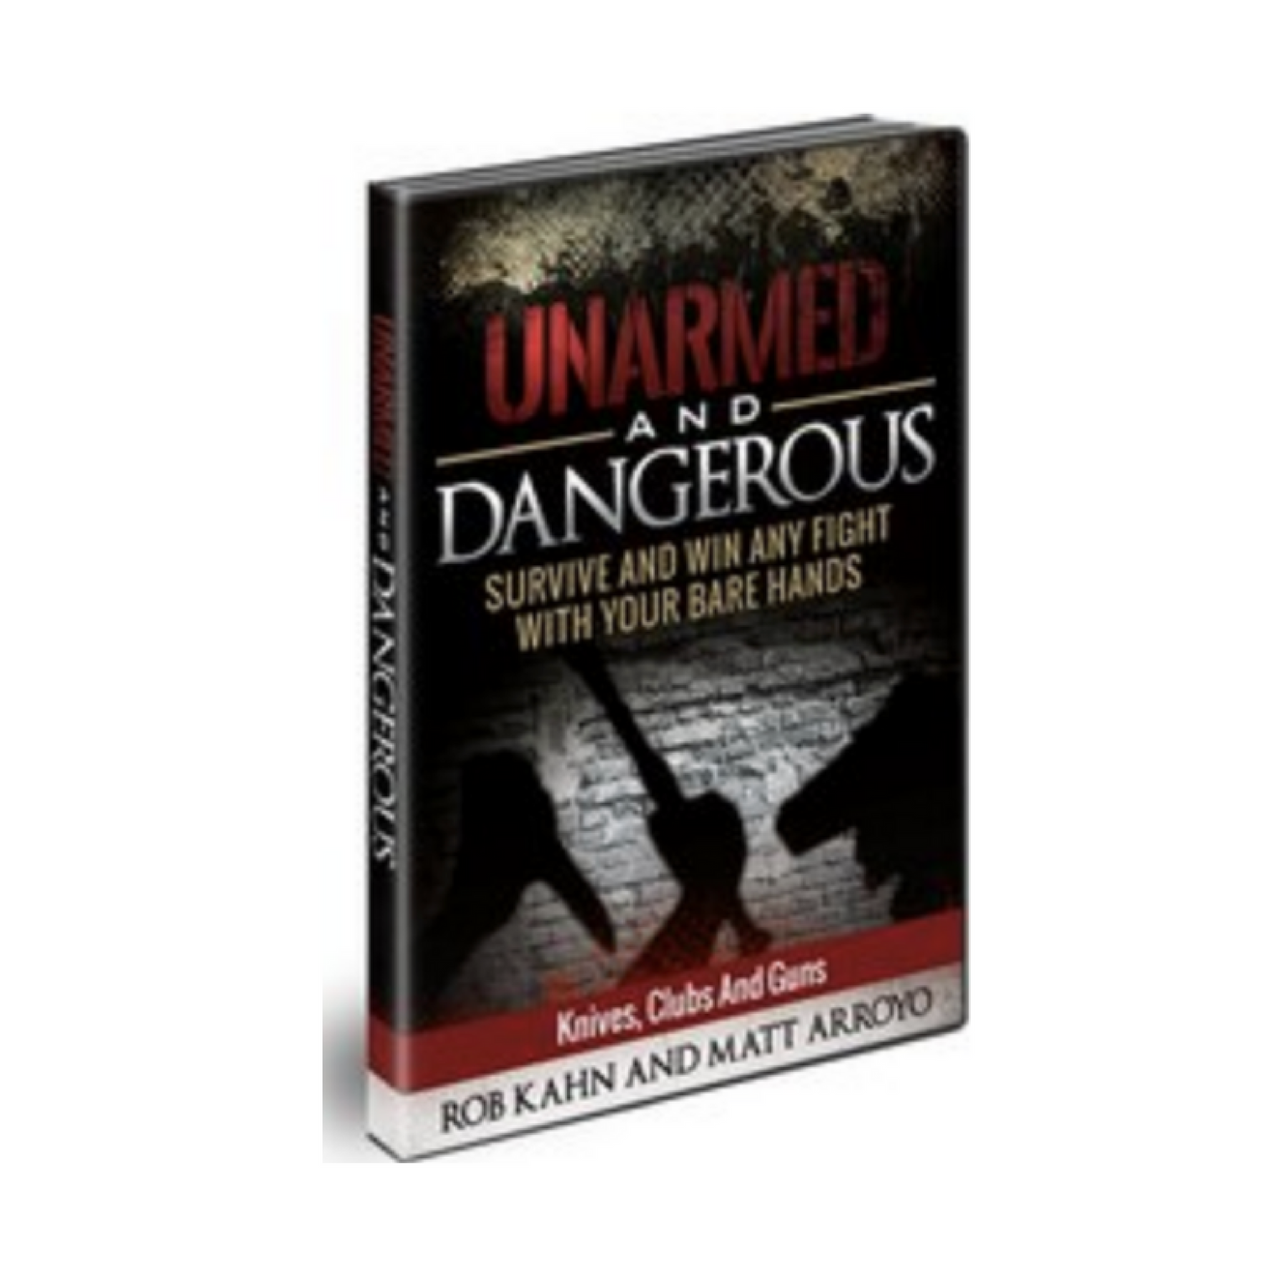 Rob Kahn And Matt Arroyo's Unarmed And Dangerous: Knives, Guns, And Clubs